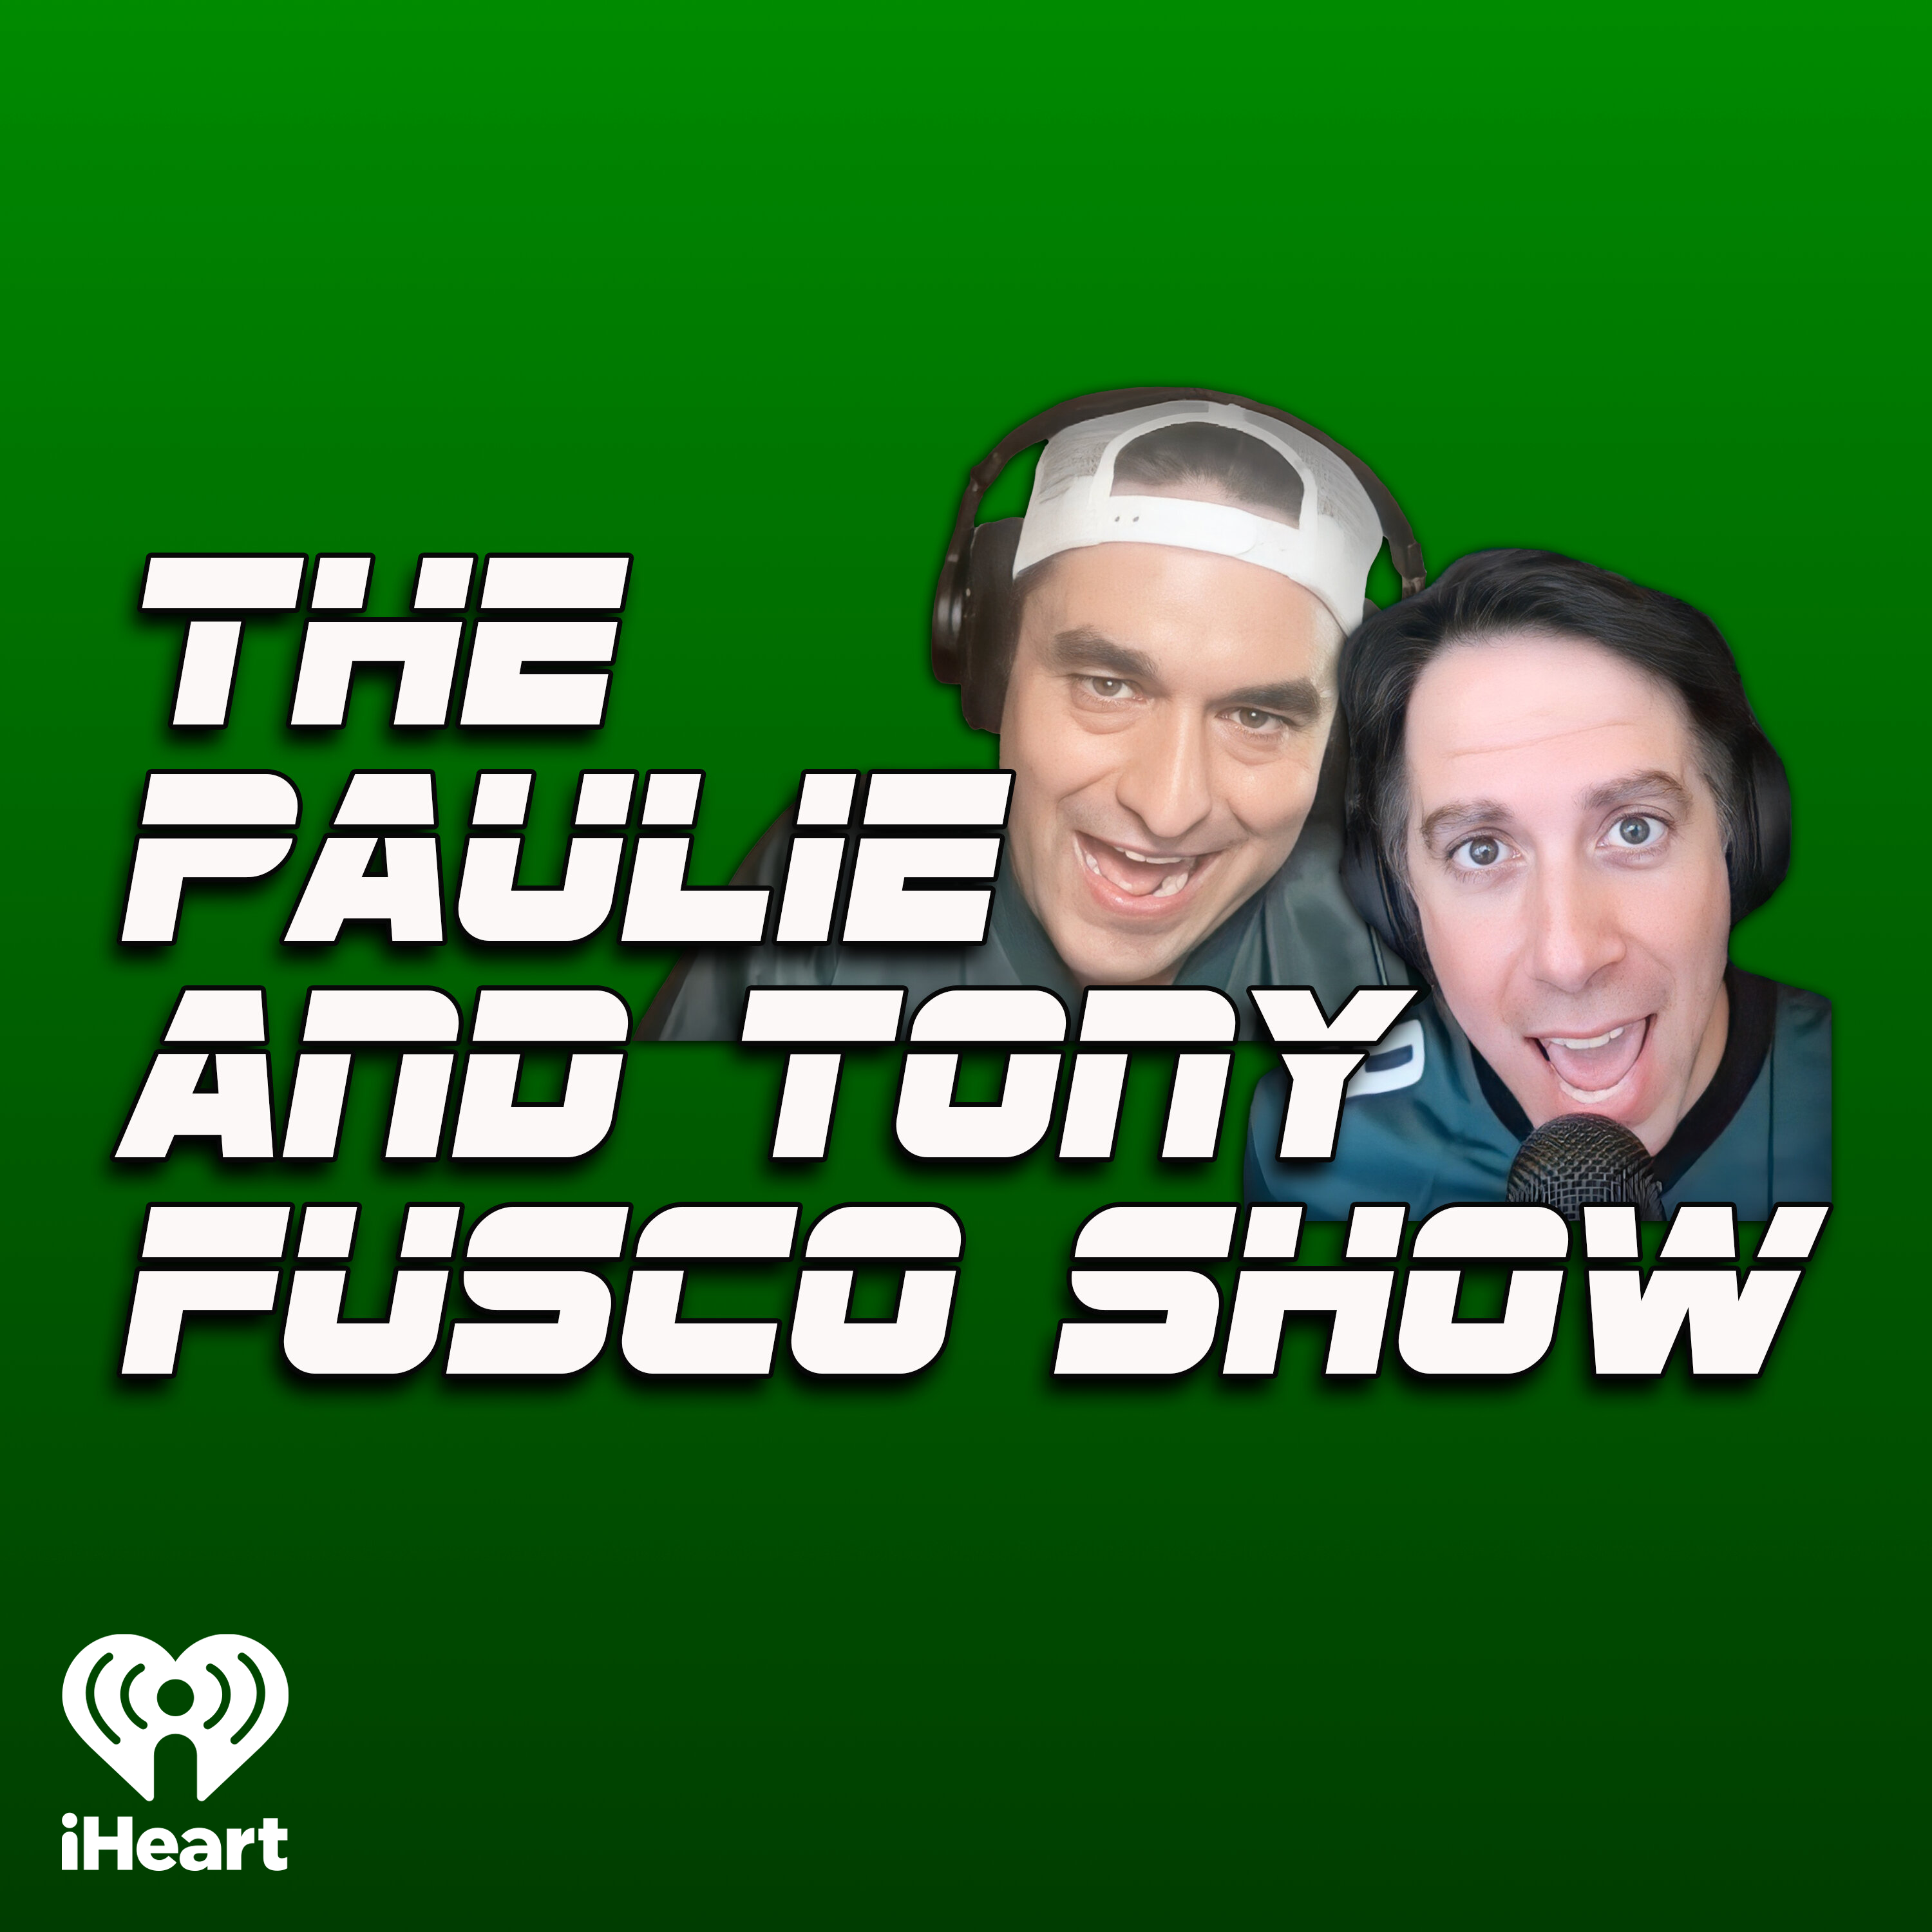 The Paulie & Tony Fusco Show: Rob Parker gets KICKED OFF THE SHOW for calling Dak take "DUMB"